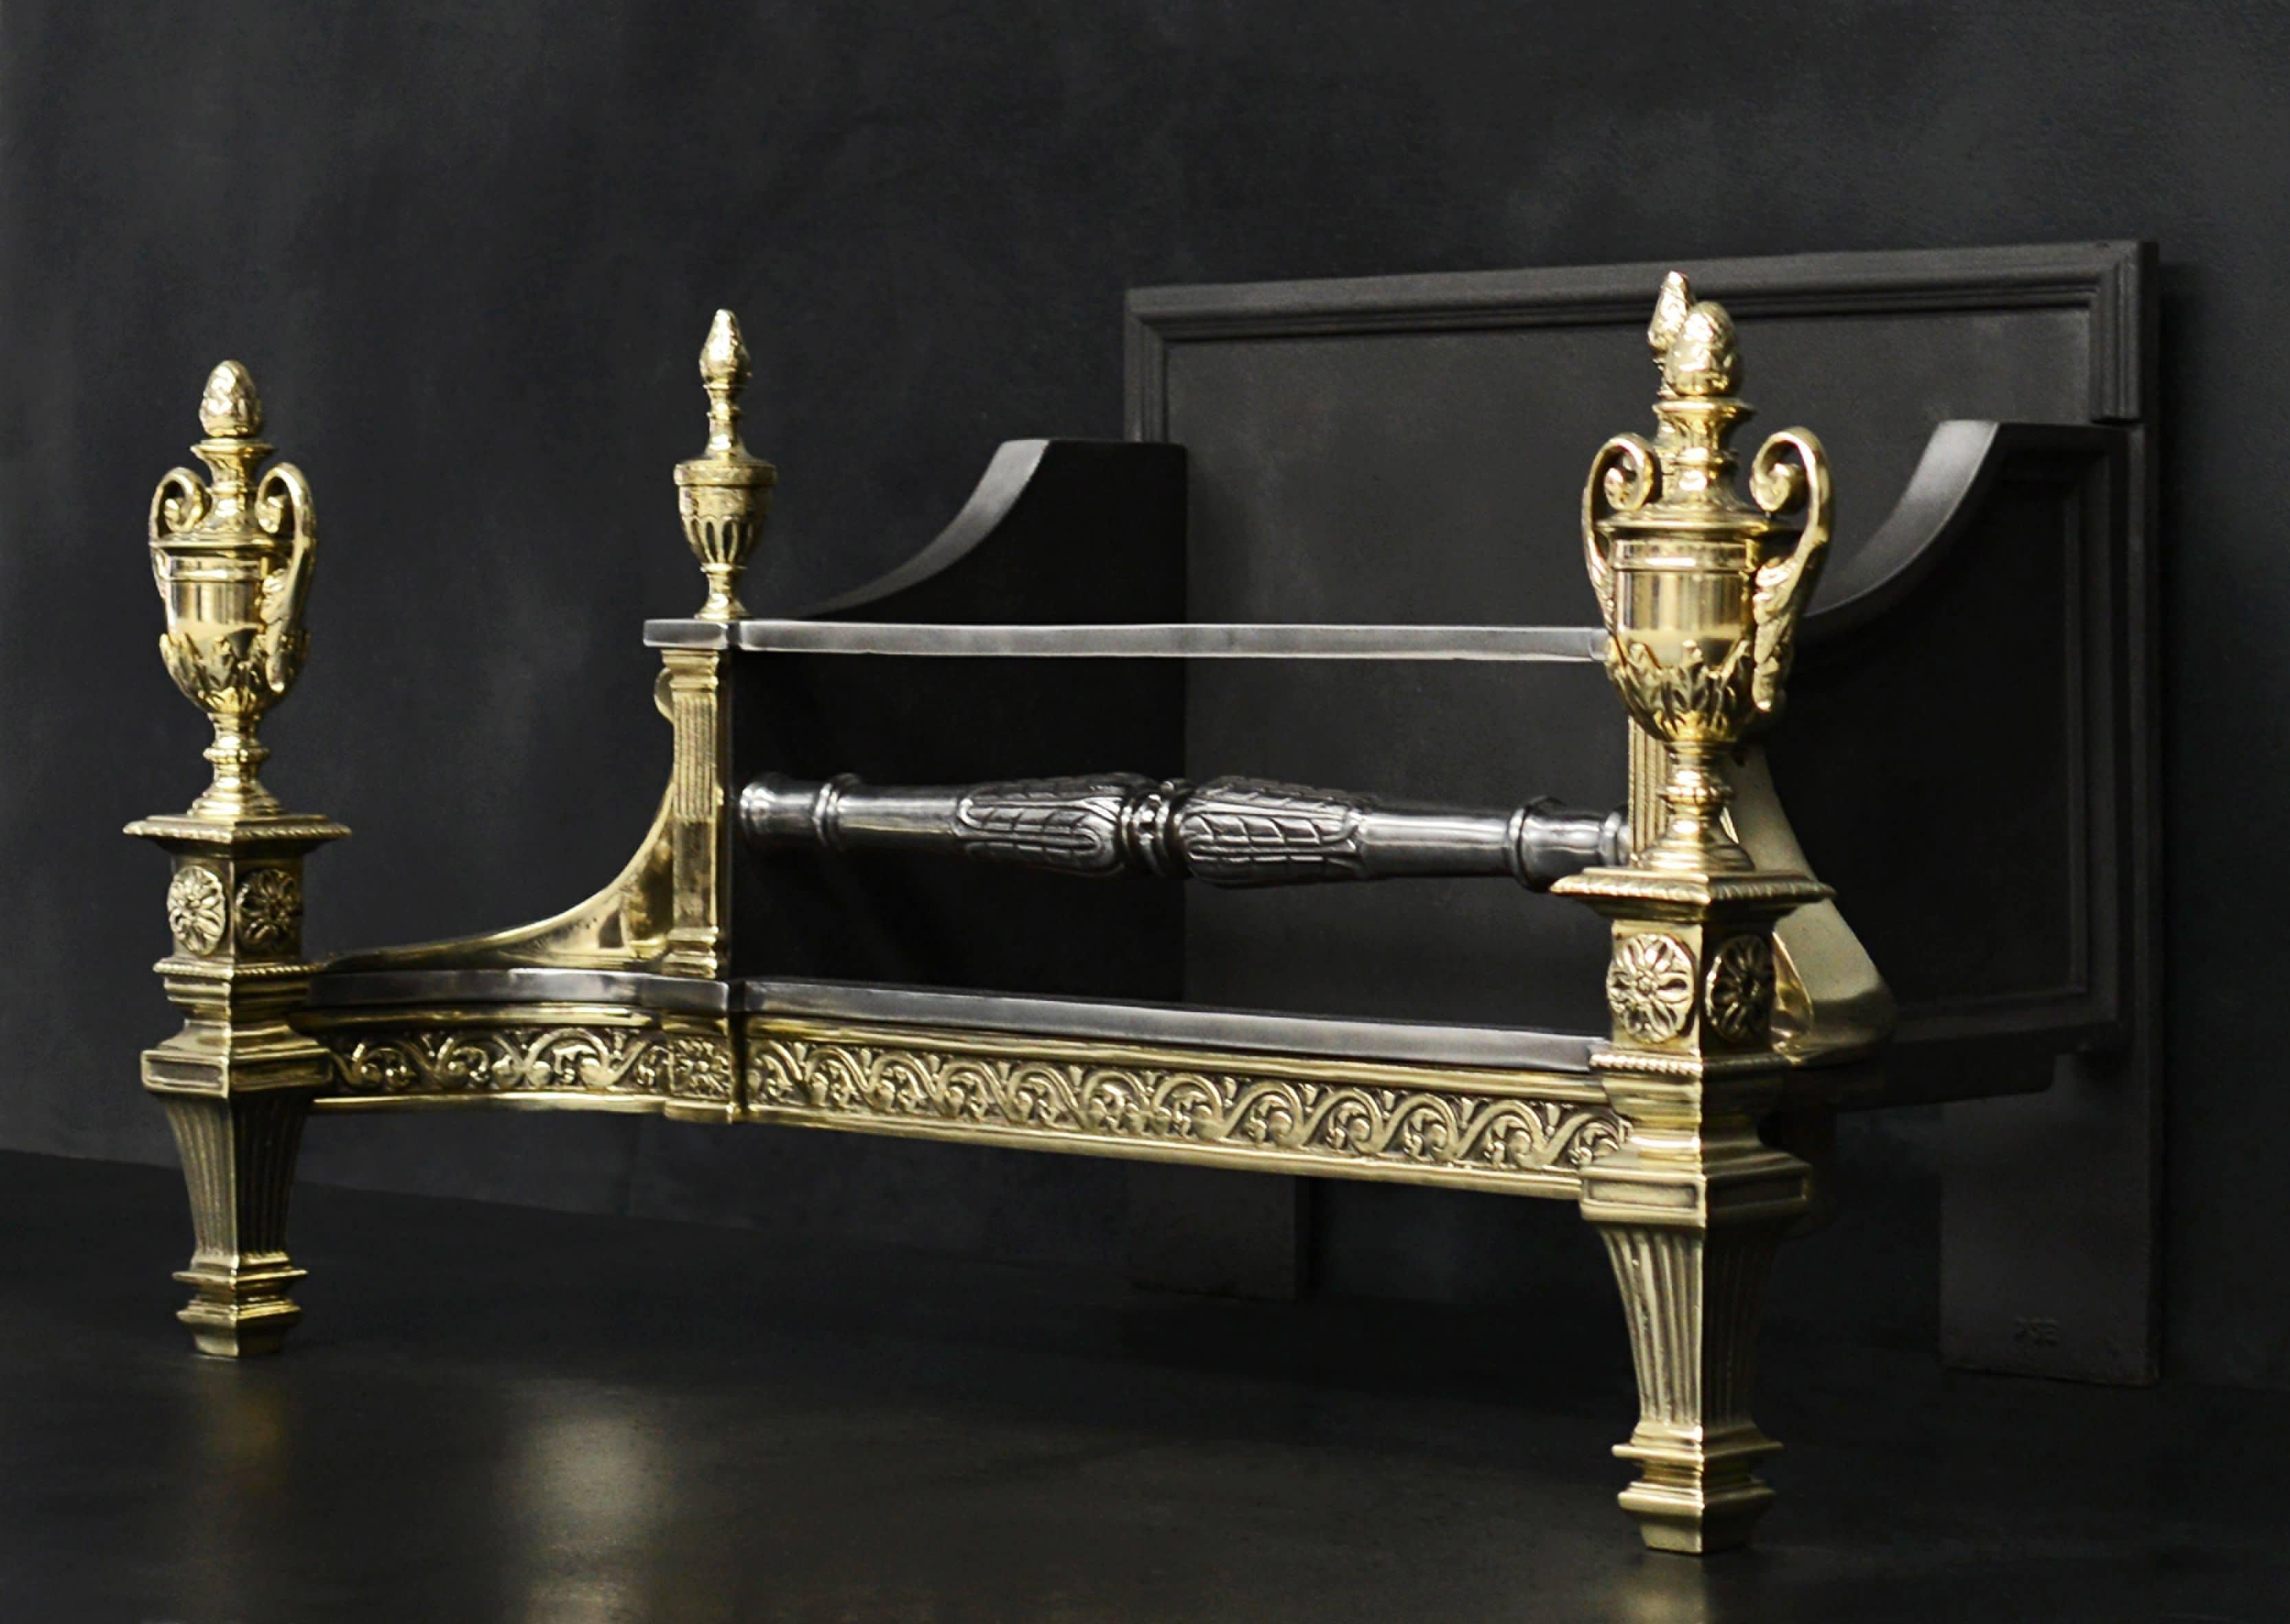 A decorative brass and steel firegrate. The tapering legs surmounted by rosette and ornate urn. The fret with scrolls and fluting, surmounted by engraved finials. English, late 19th century.

Measures: Width at front: 890 mm 35